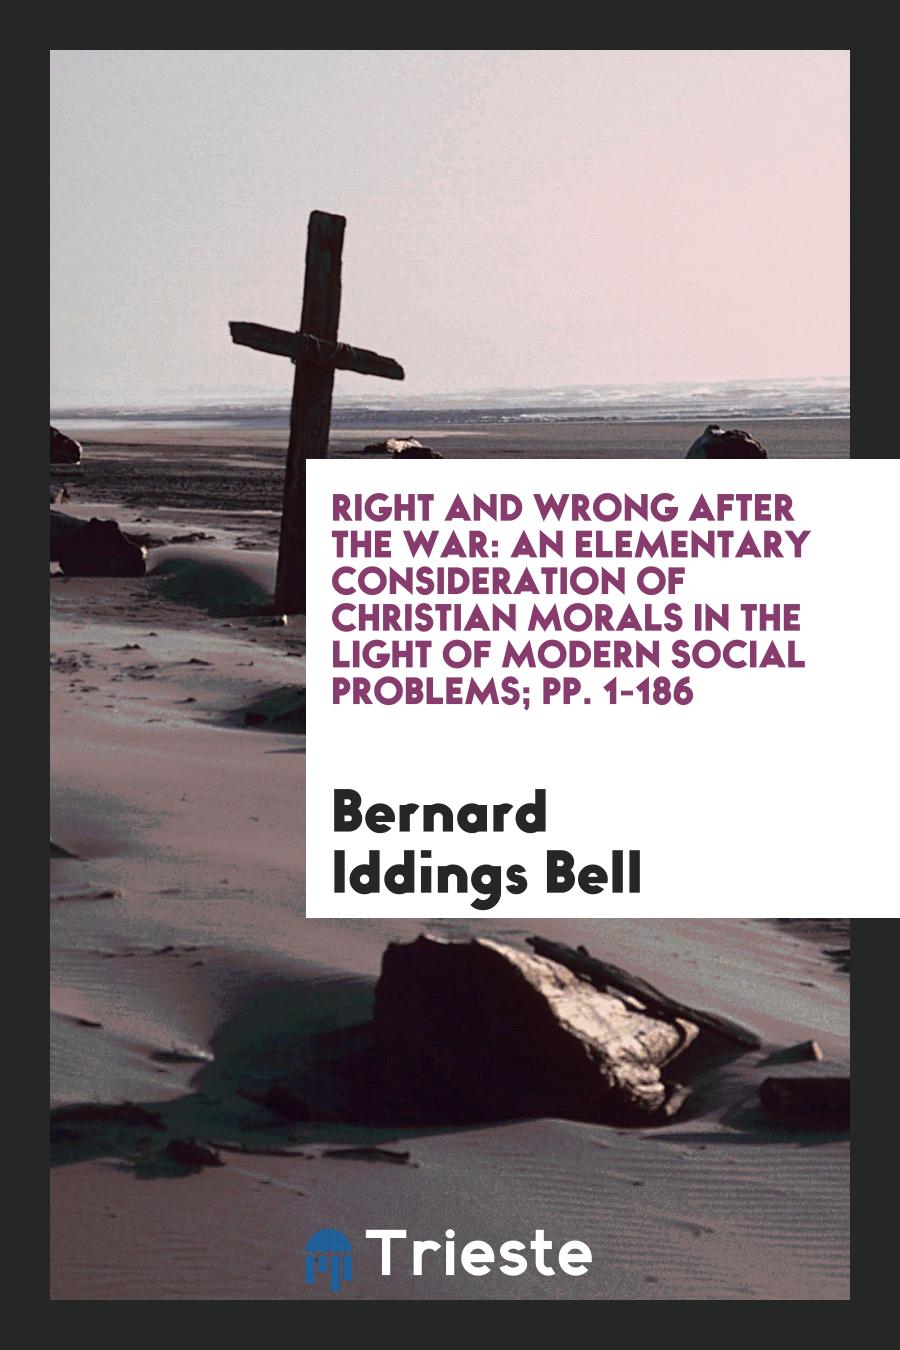 Right and Wrong After the War: An Elementary Consideration of Christian Morals in the Light of Modern Social Problems; pp. 1-186